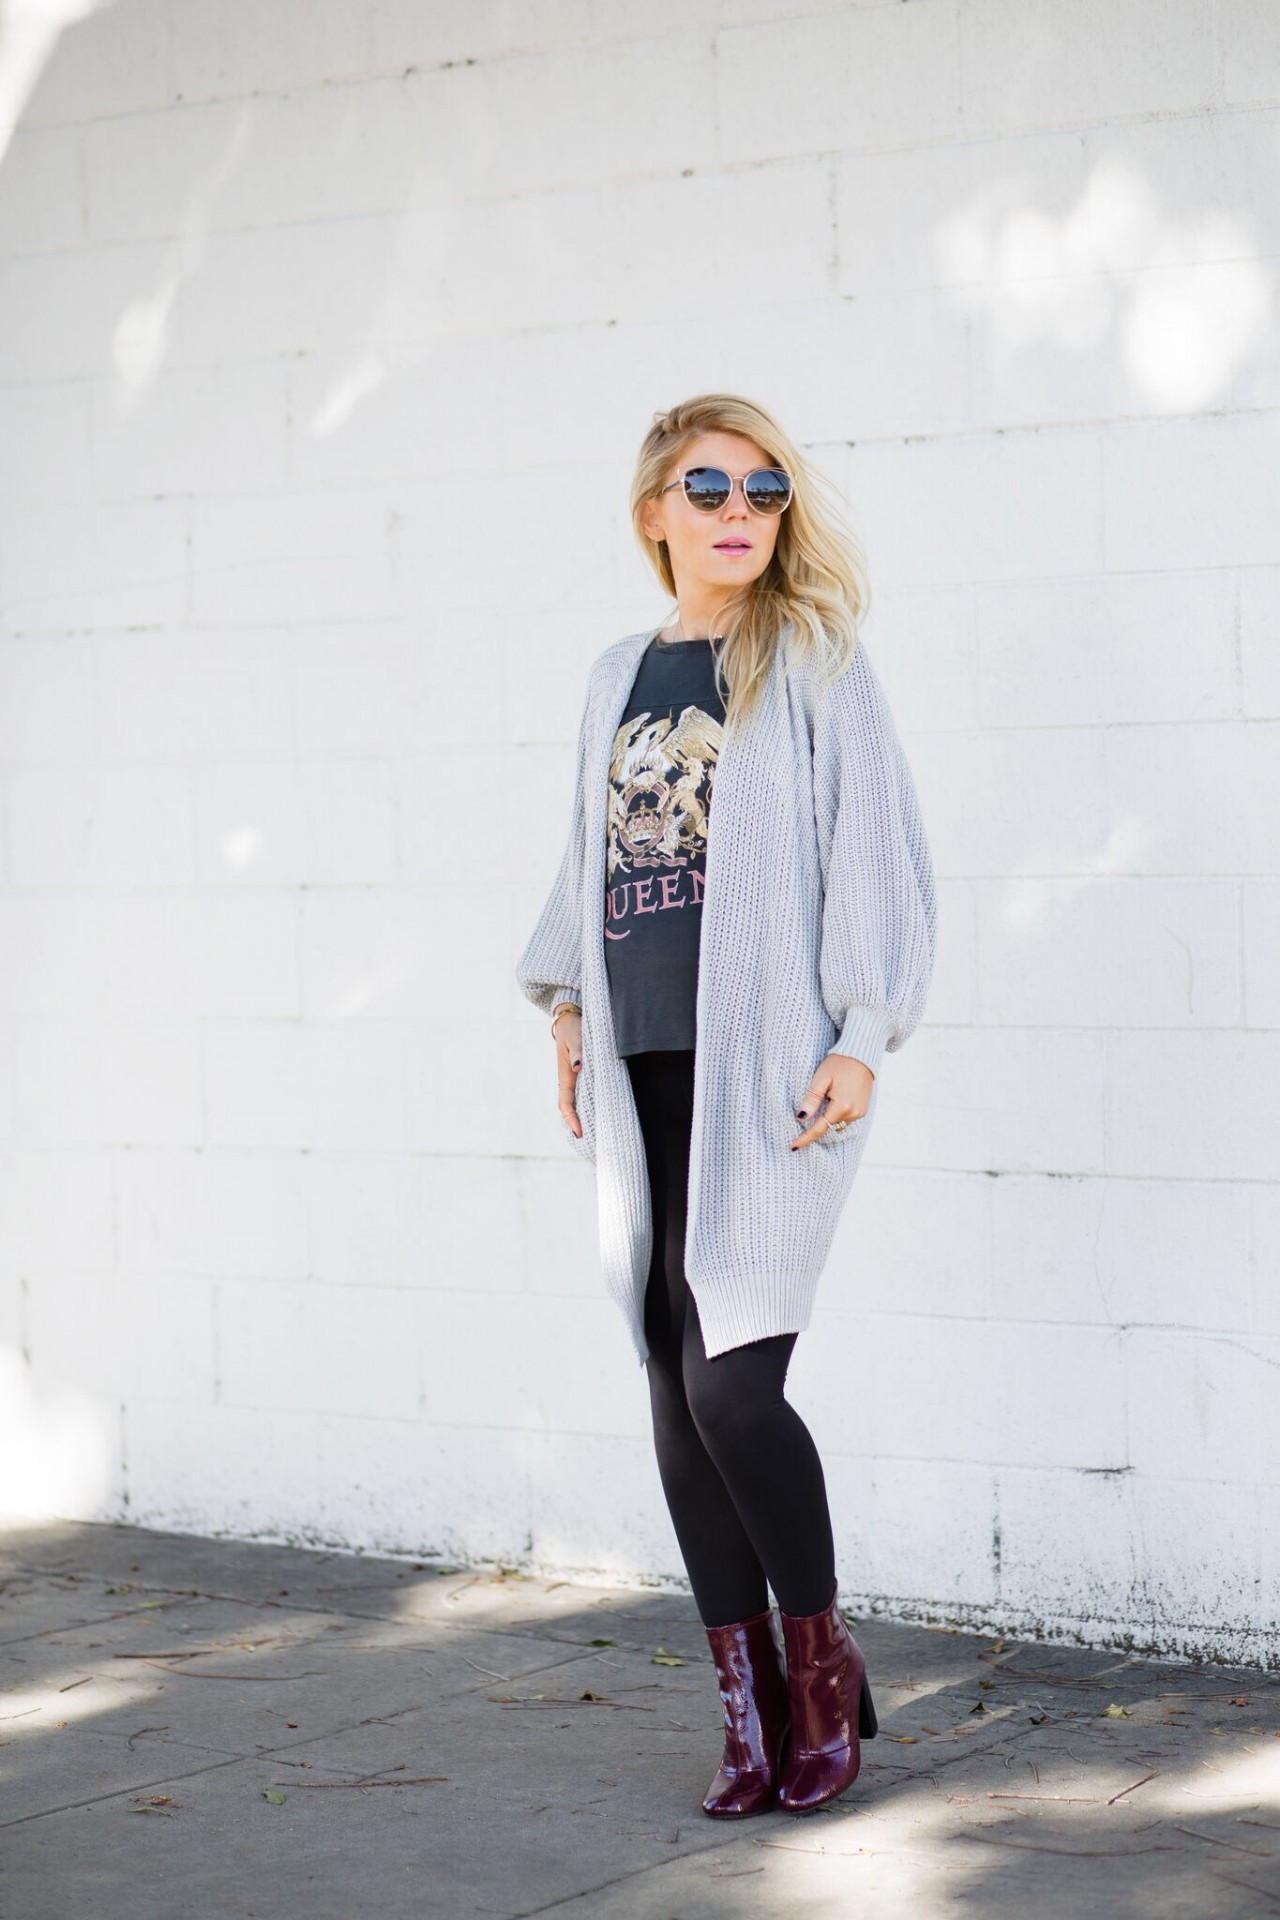 Top 5 Cardigans and Concert Tees - Lunchpails and Lipstick